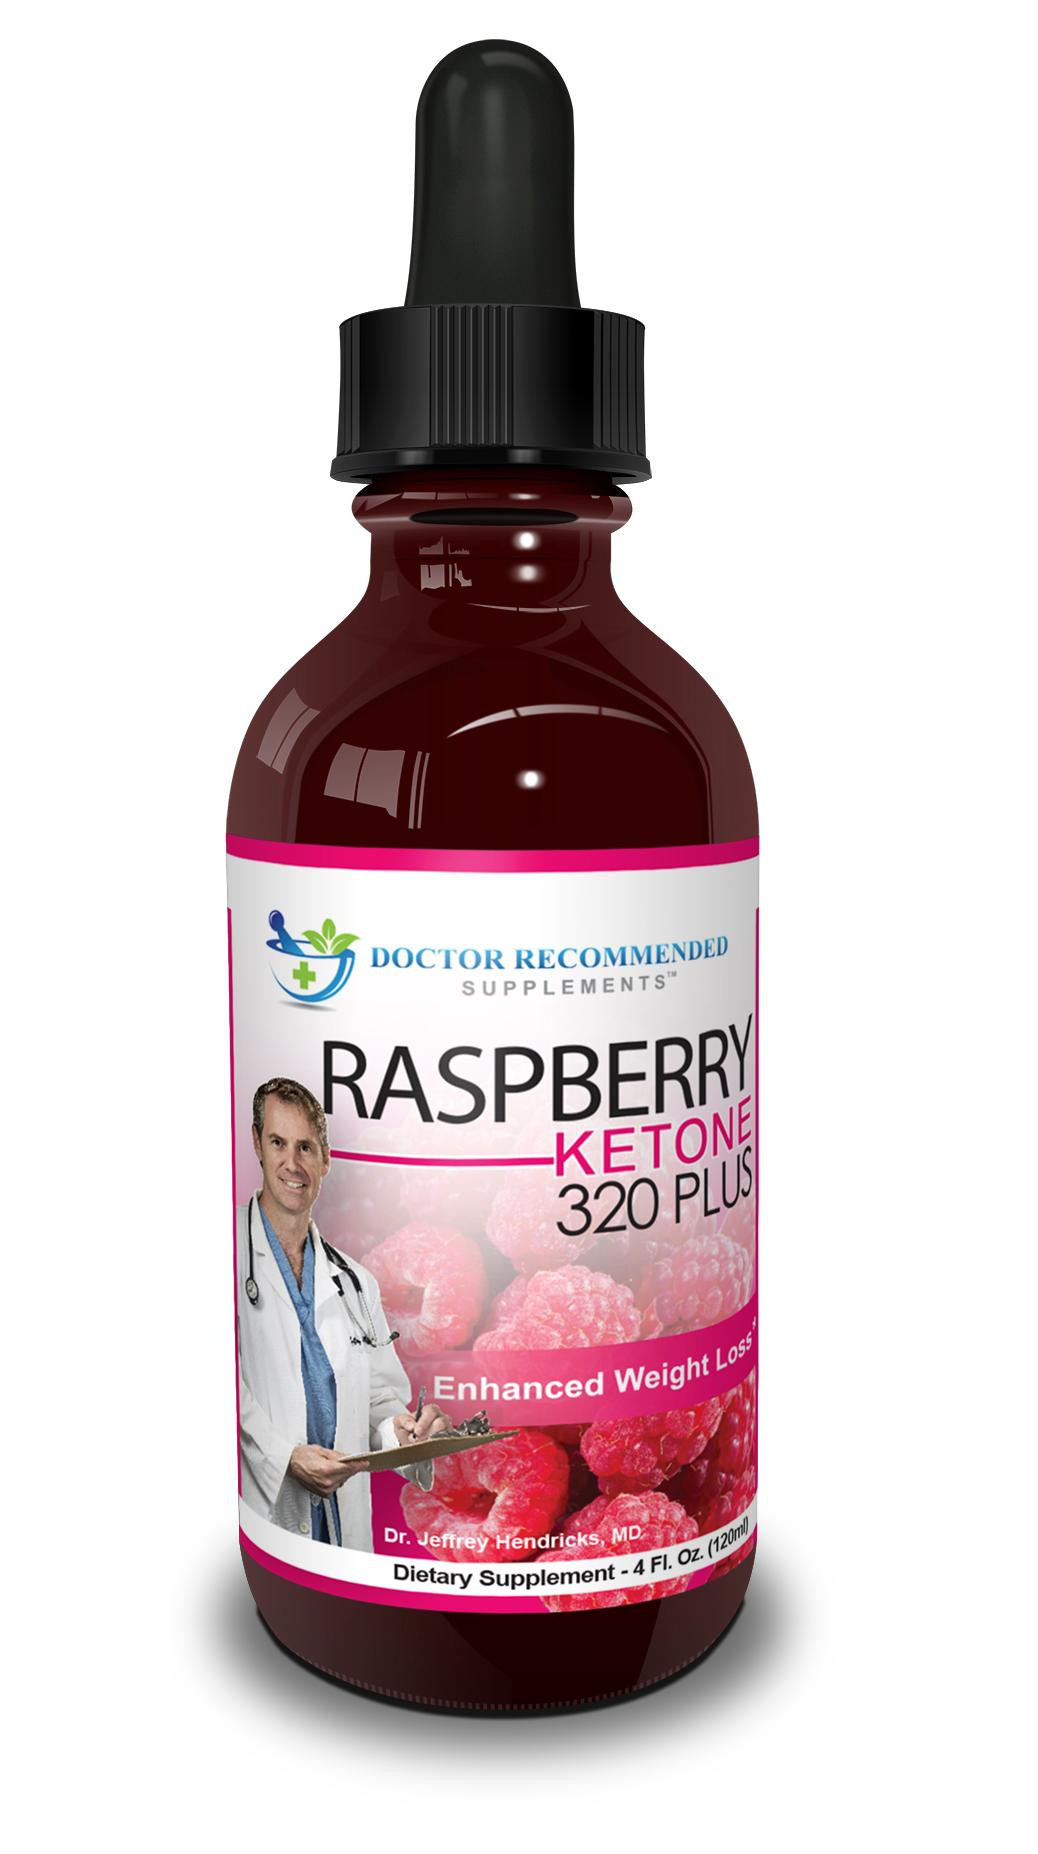 Weight Loss Supplements That Work Dr. Oz
 Amazon Doctor Re mended Raspberry Ketone Supplement